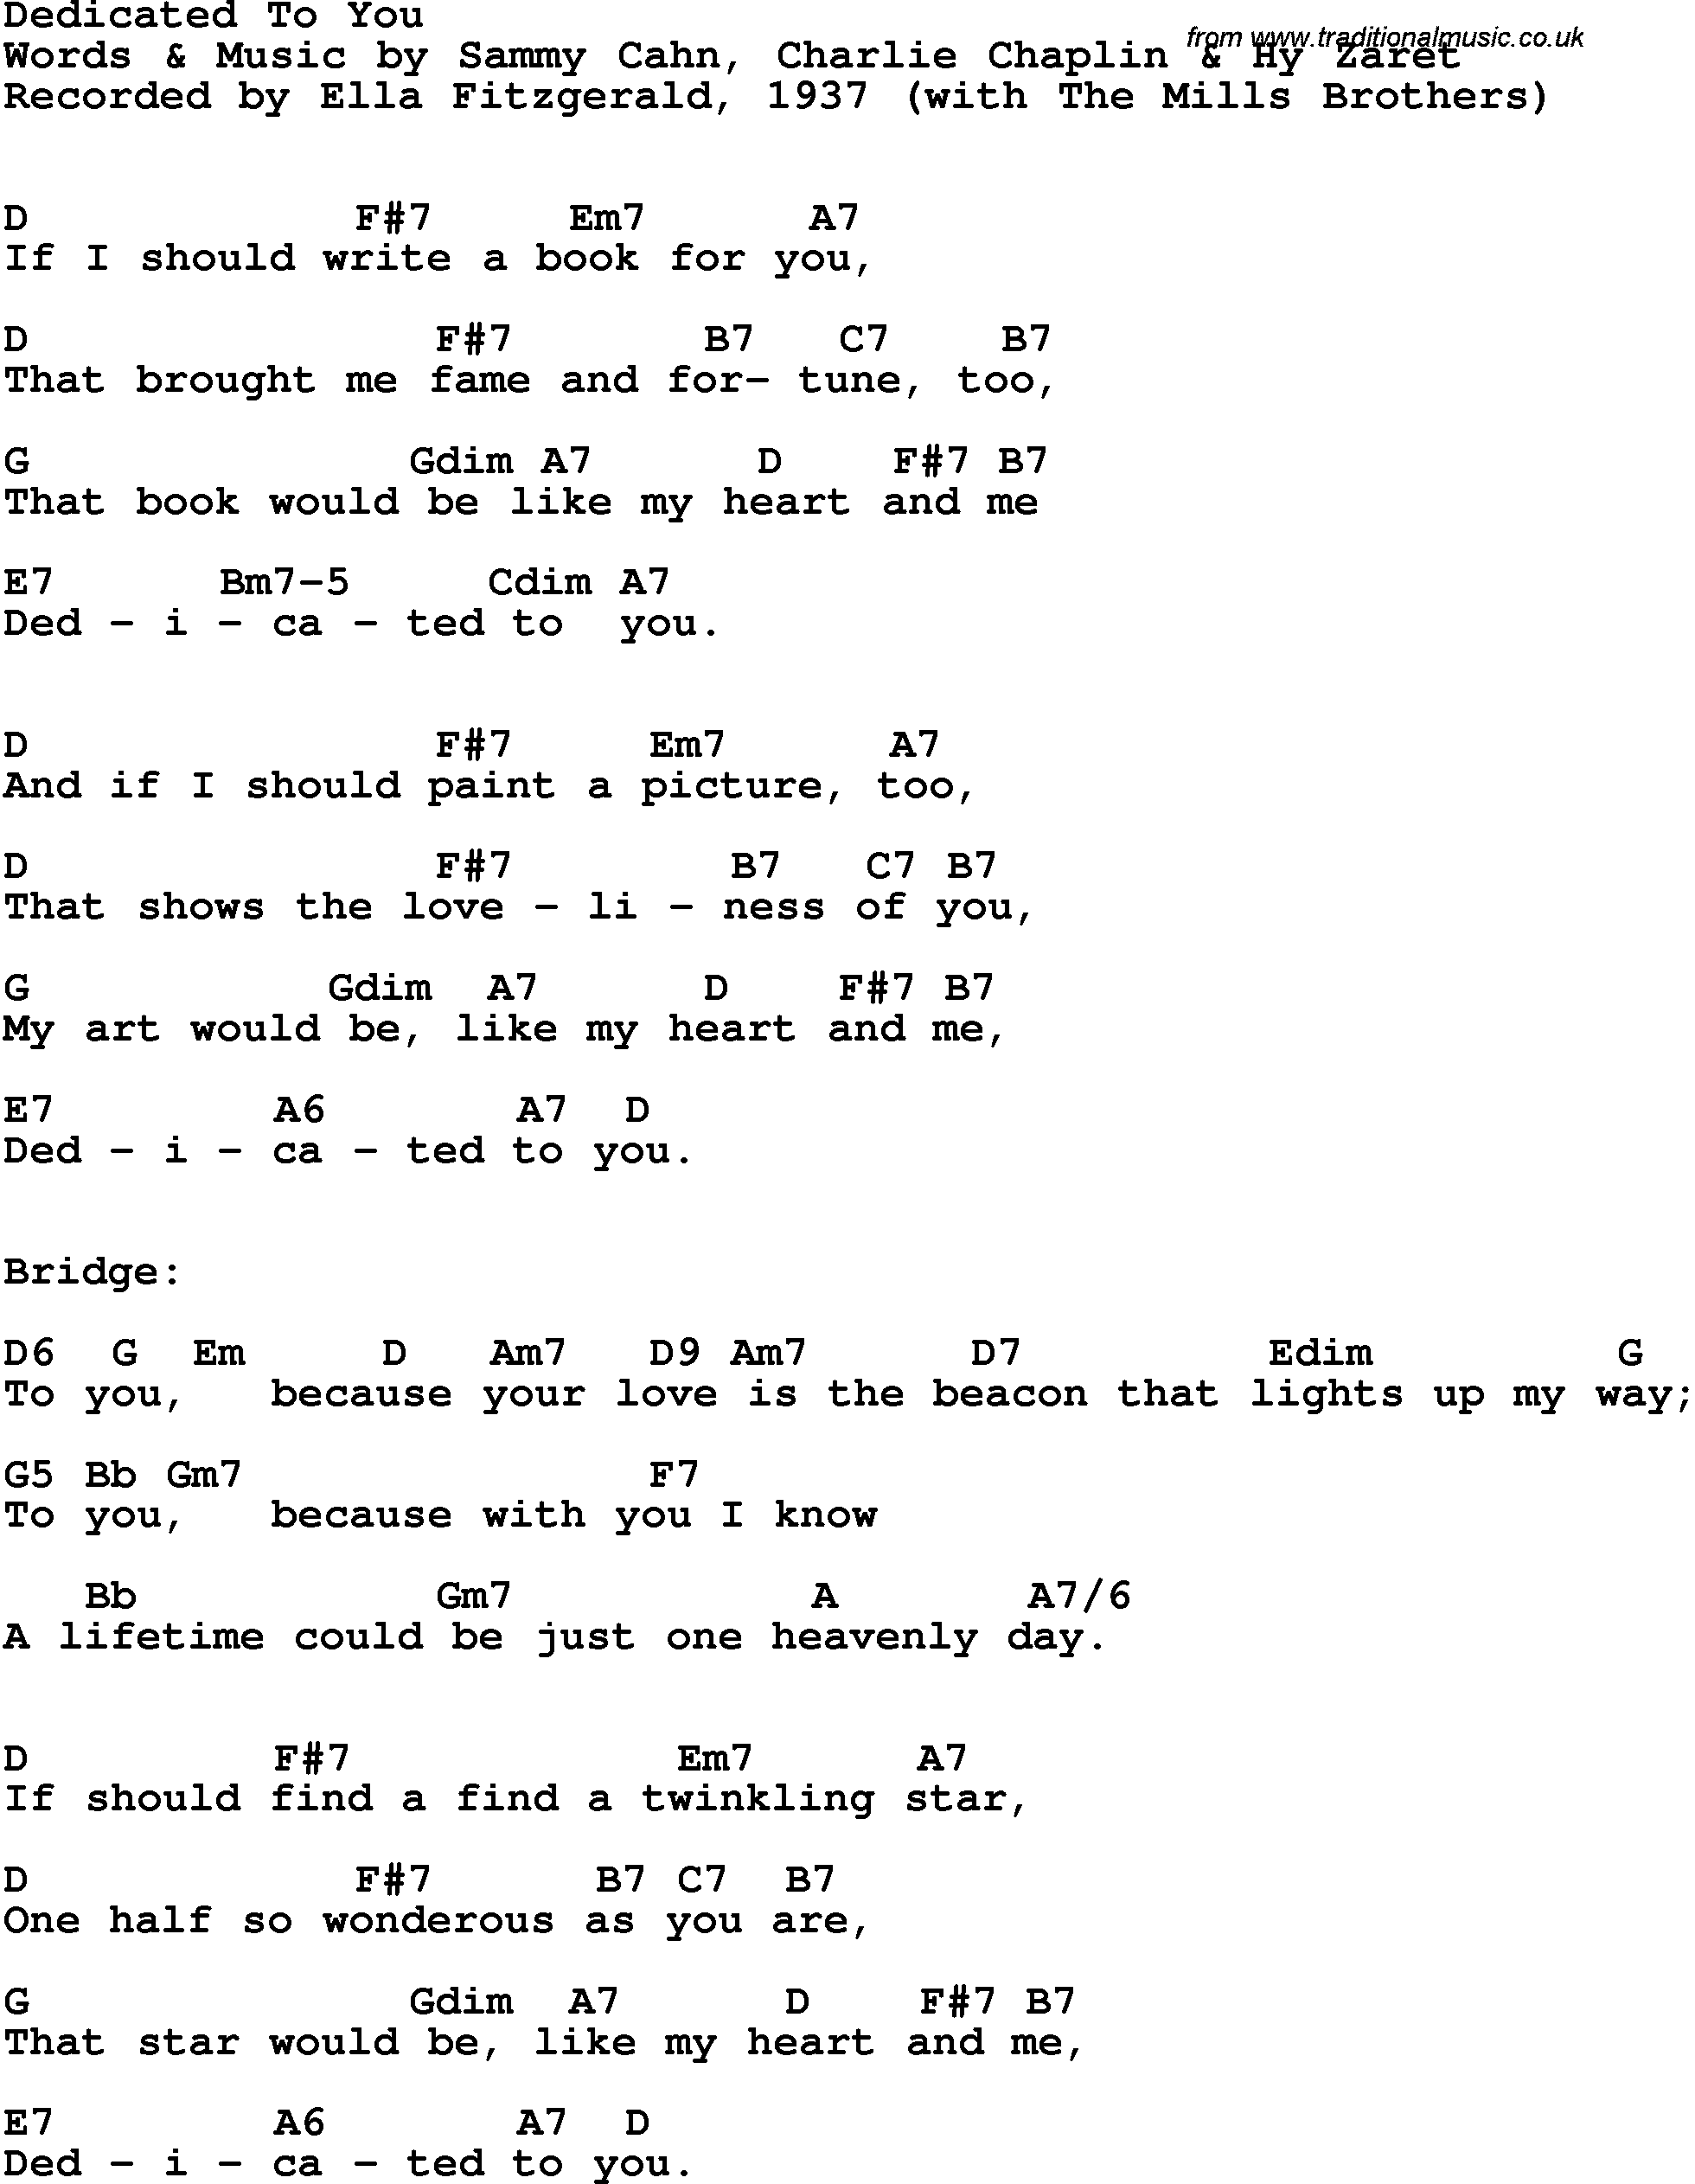 Song Lyrics with guitar chords for Dedicated To You - Ella Fitzgerald, 1937, With The Mills Brothers